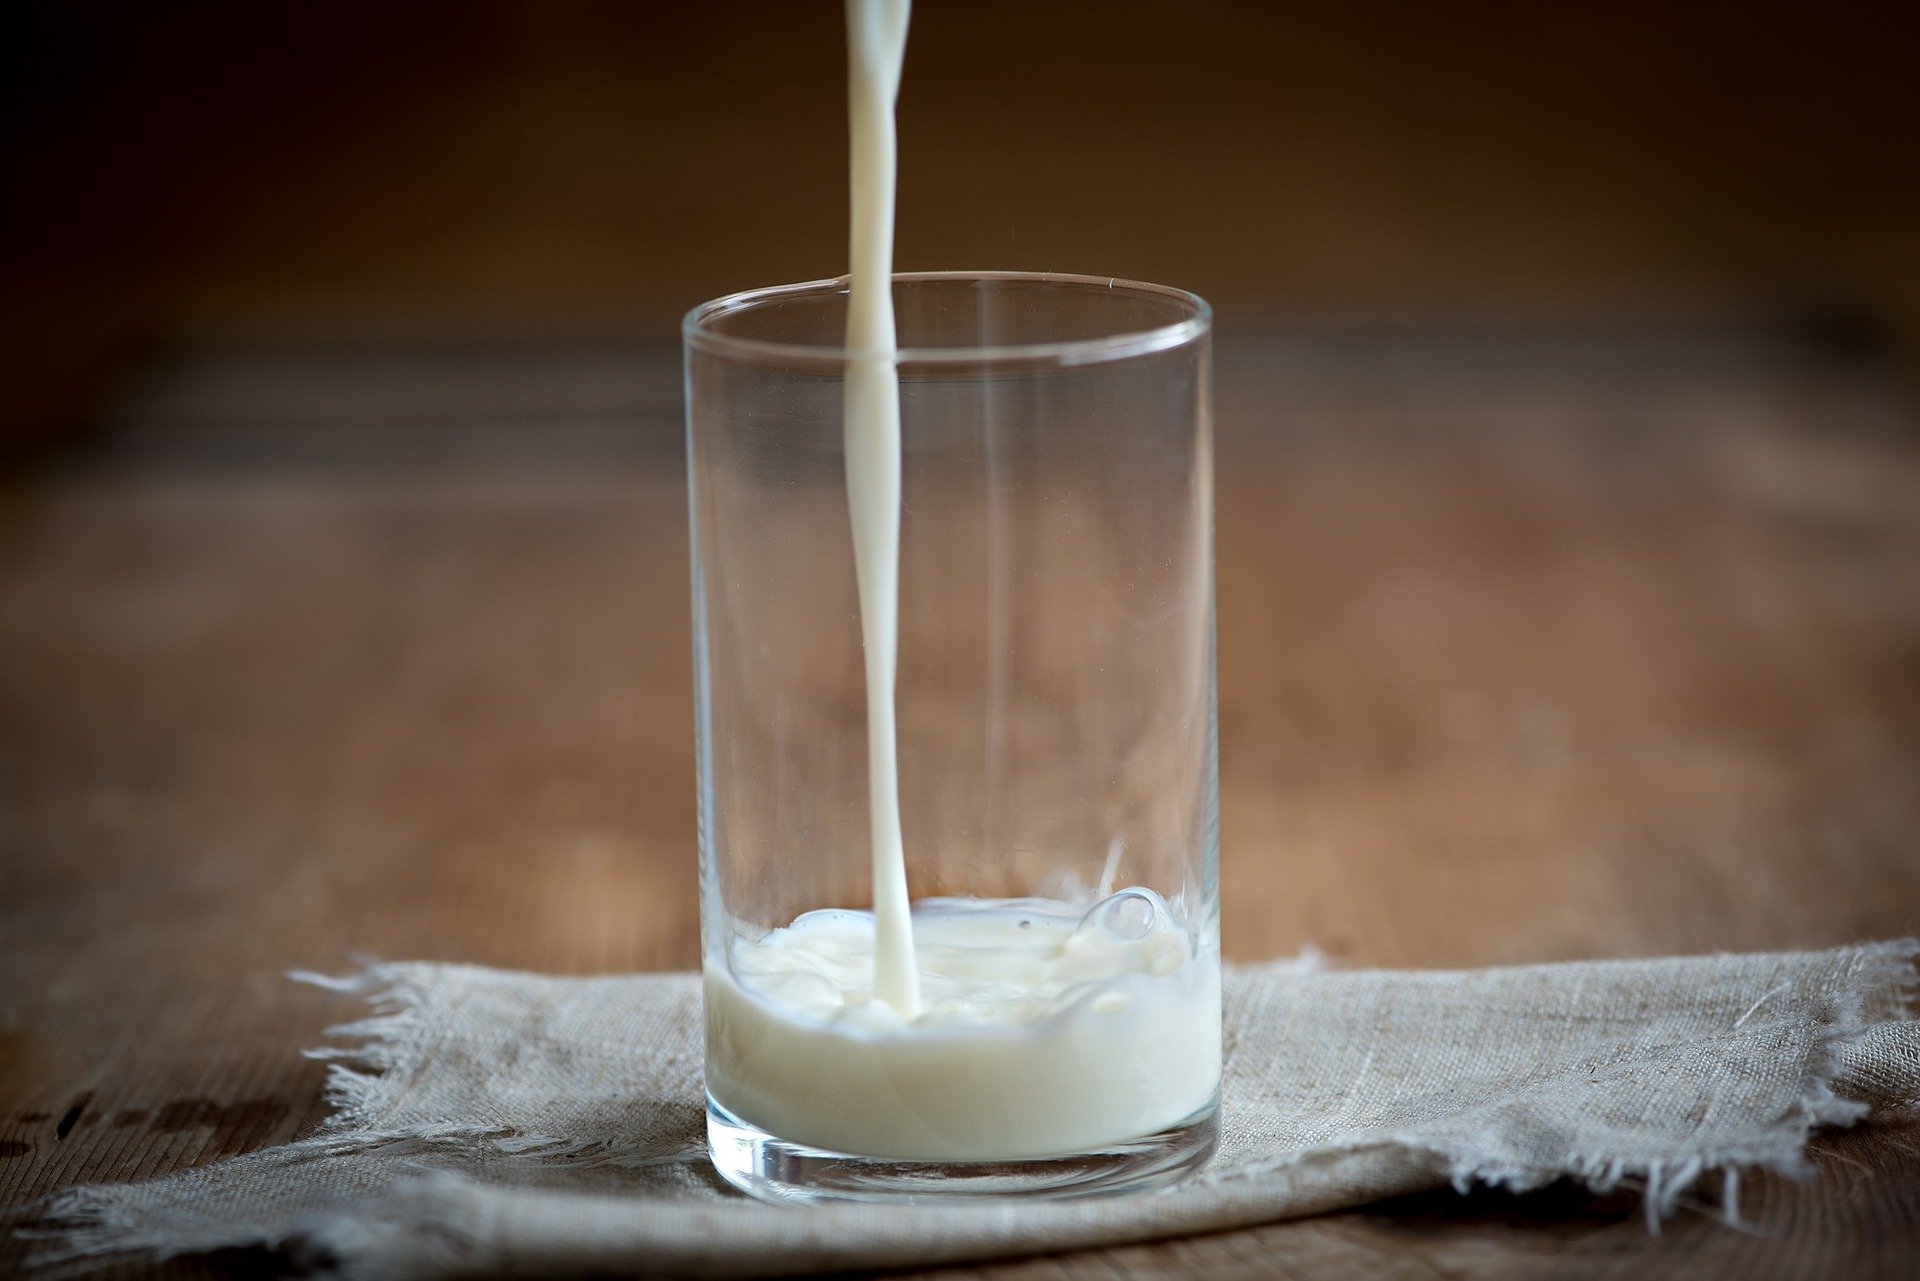 Can milk protect the body from metabolic syndrome?